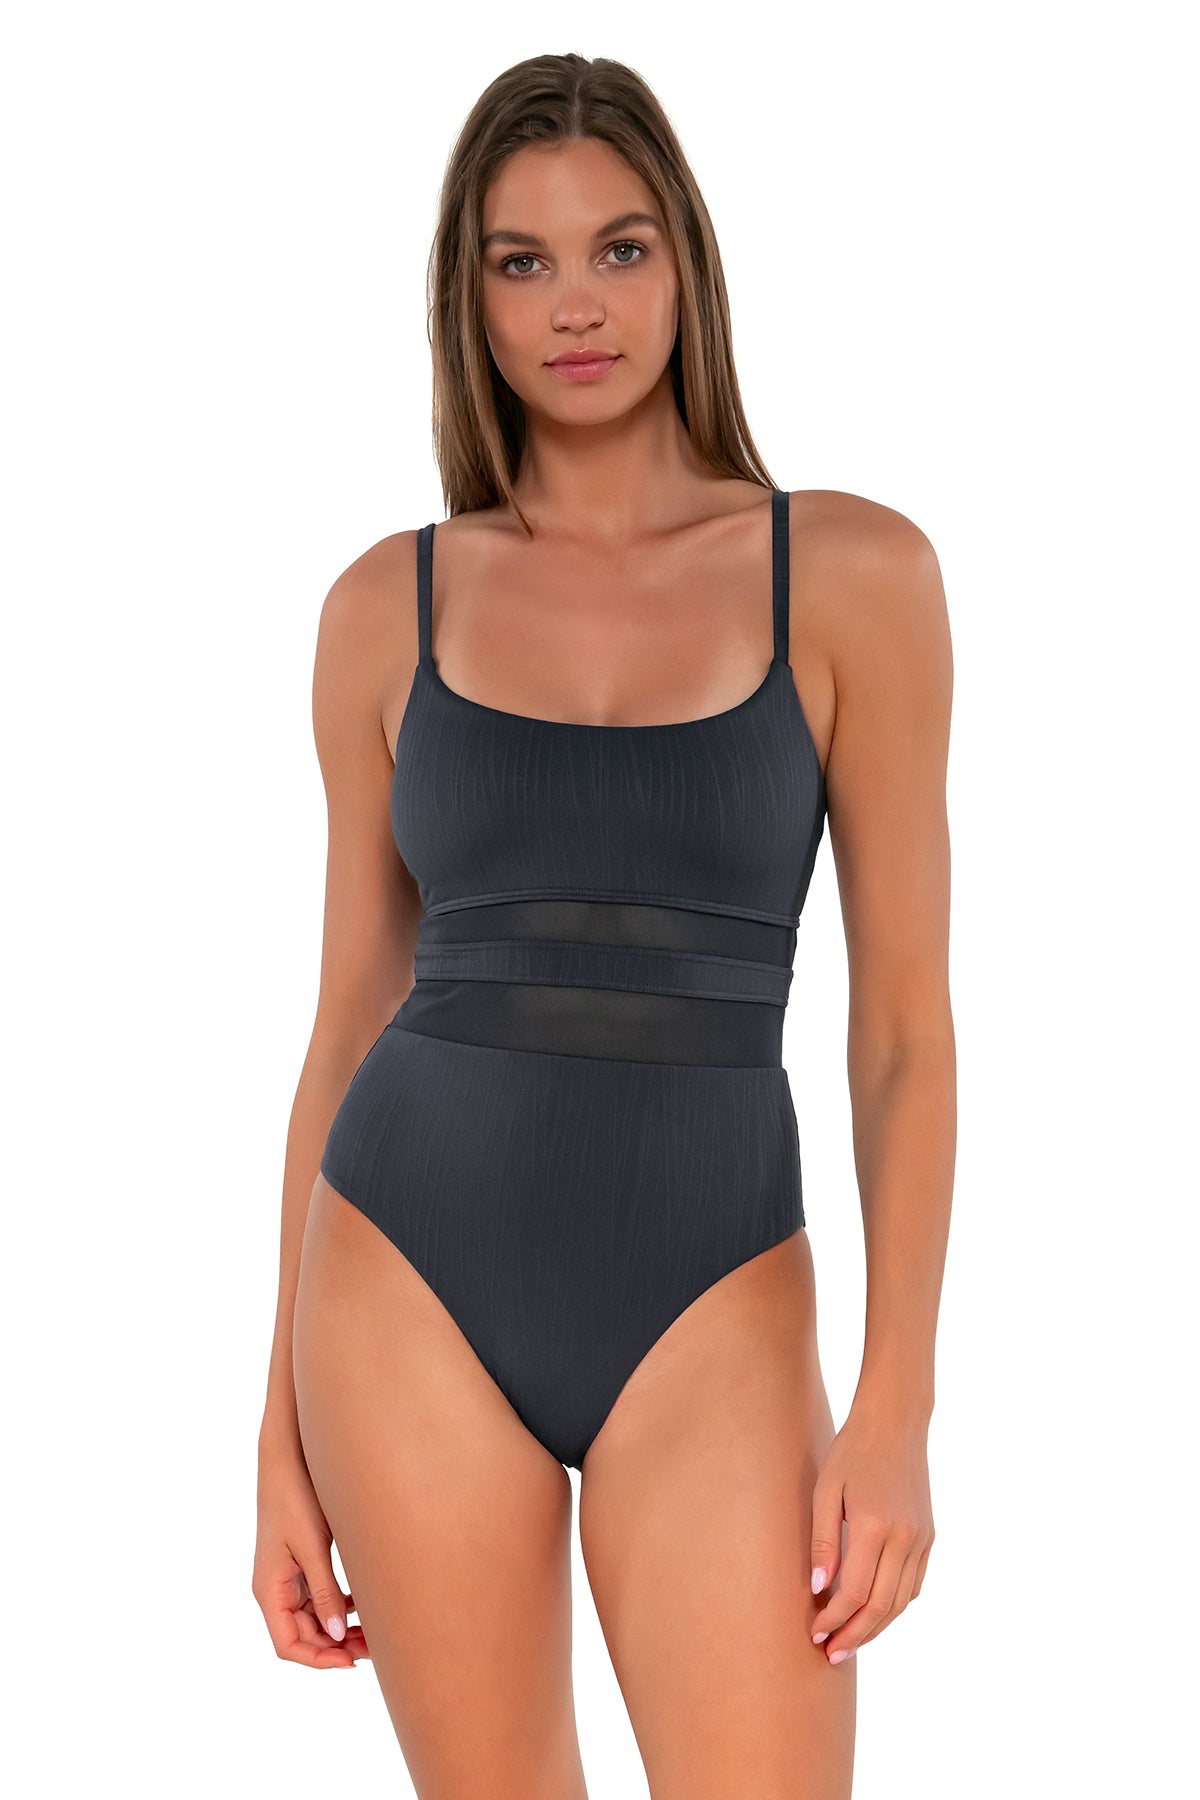 Front pose #2 of Daria wearing Sunsets Slate Seagrass Texture Alexia One Piece